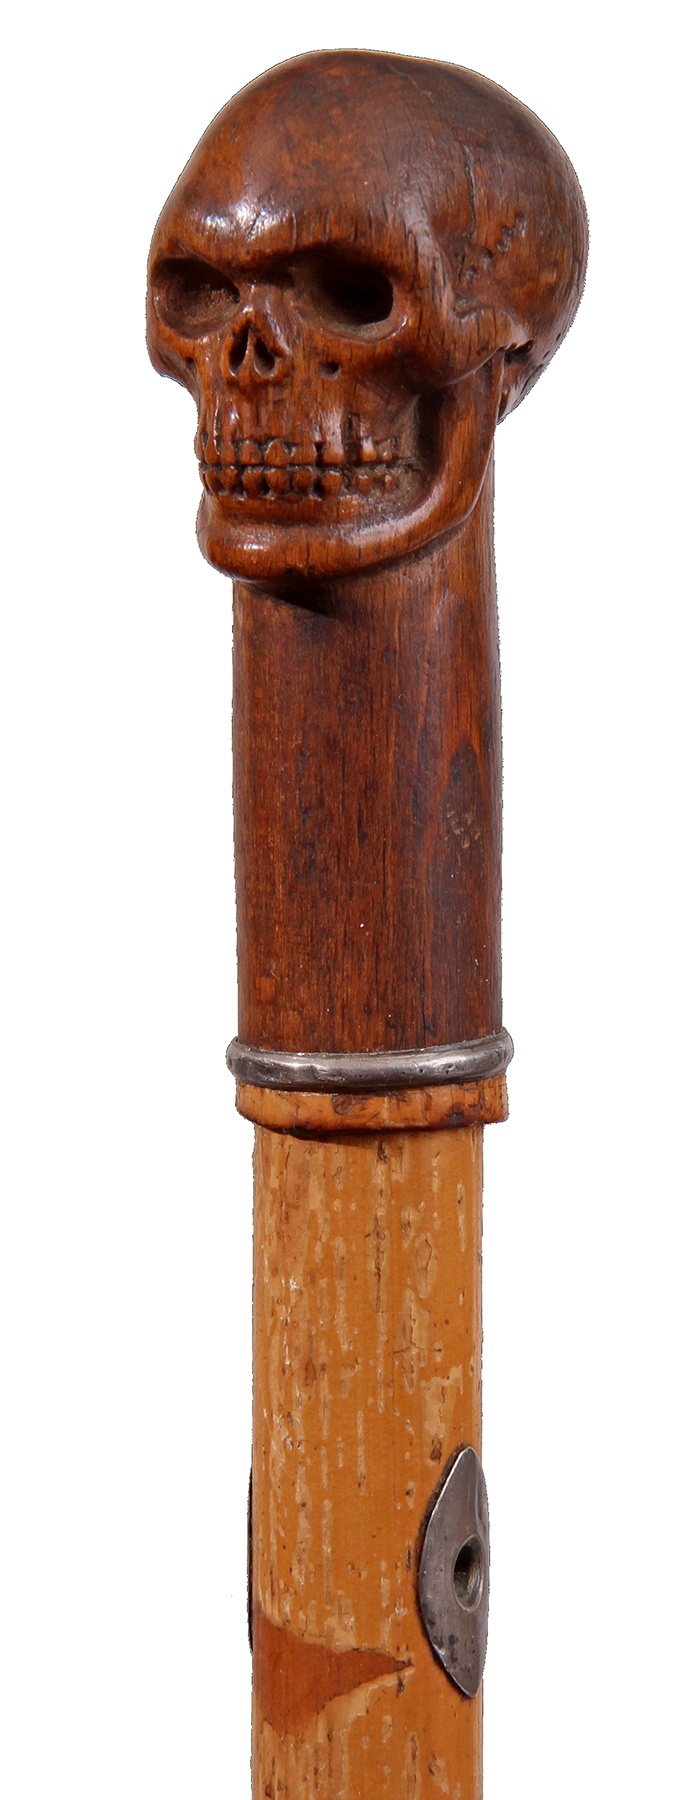 Antique and Quality Modern Cane Auction - 130.jpg